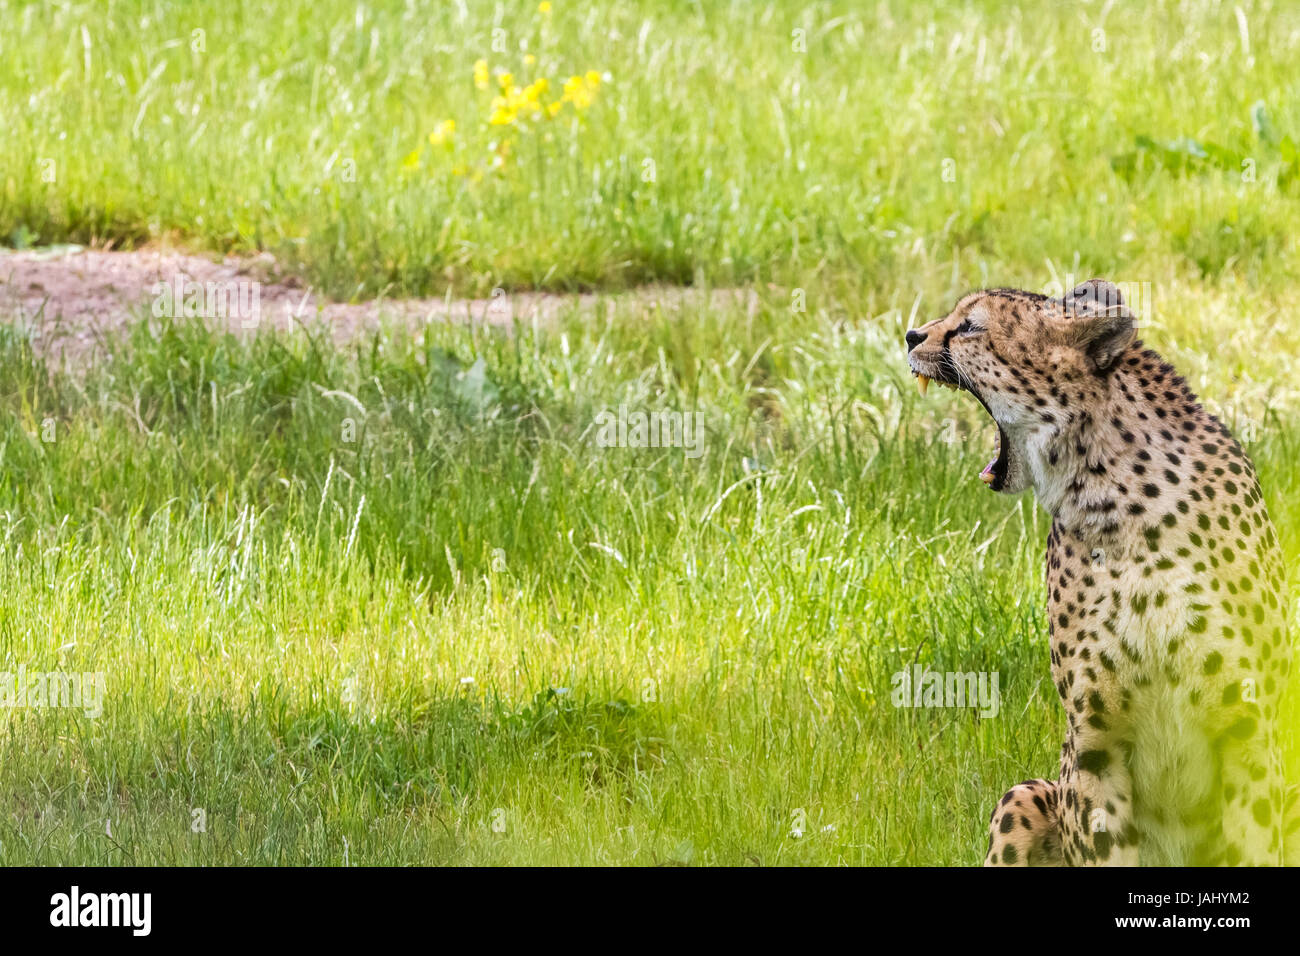 In the grass there is an asiatic cheetah Stock Photo